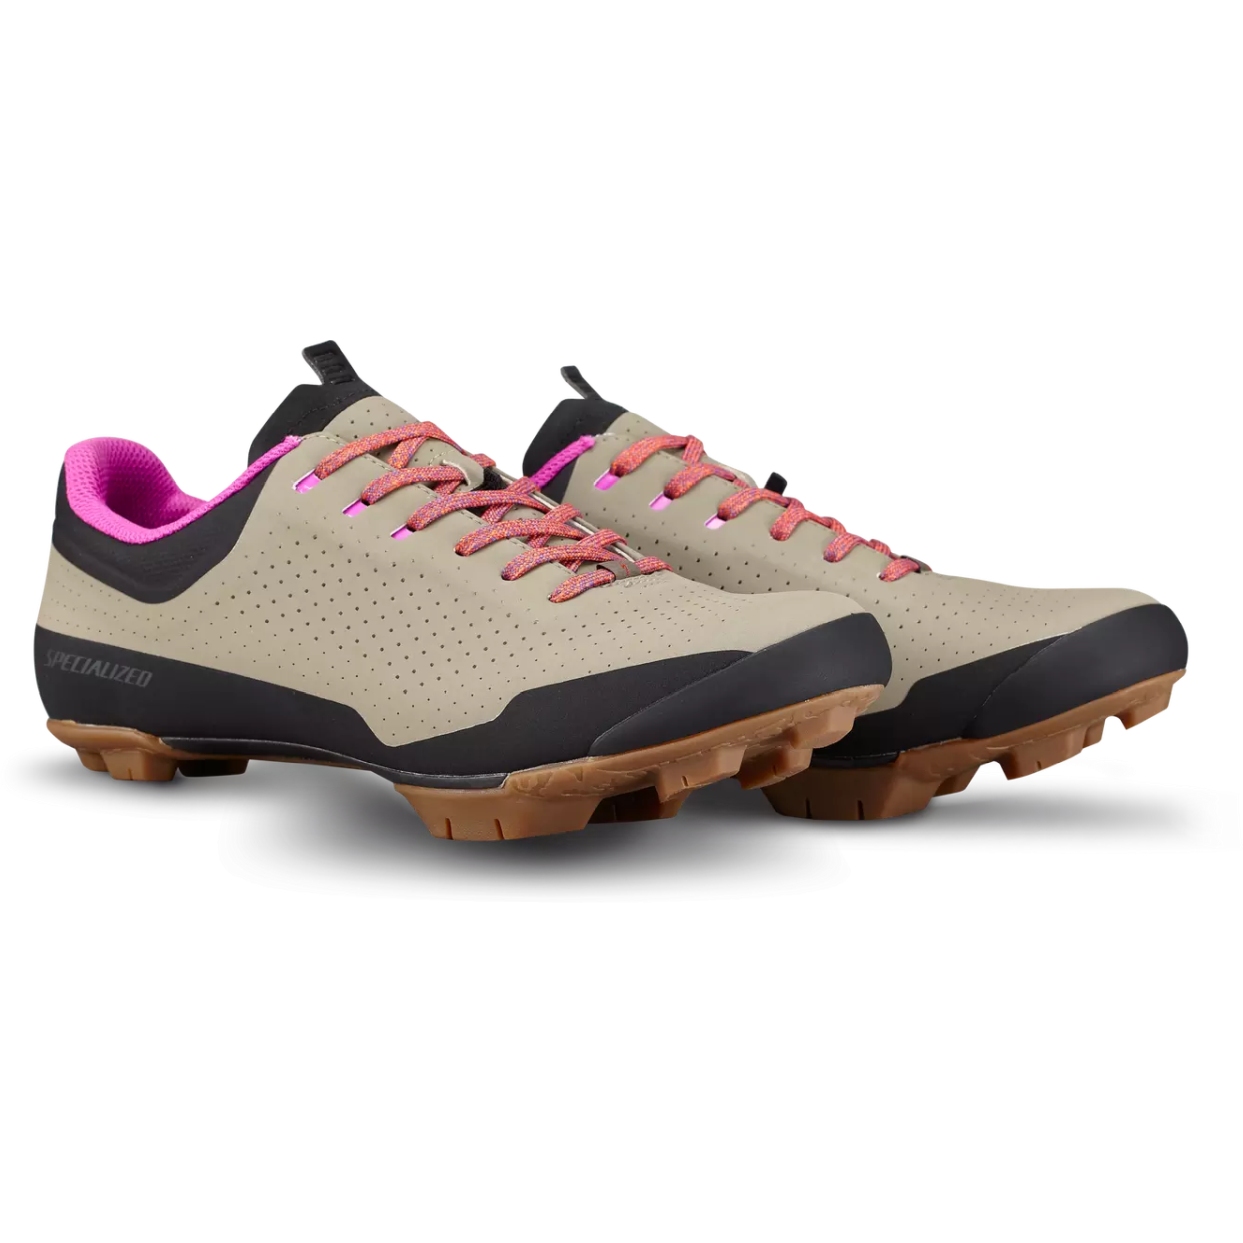 Photo produit de Specialized Chaussures pour Gravel - Recon ADV - Taupe/Dark Moss Green/Fiery Red/Purple Orchid